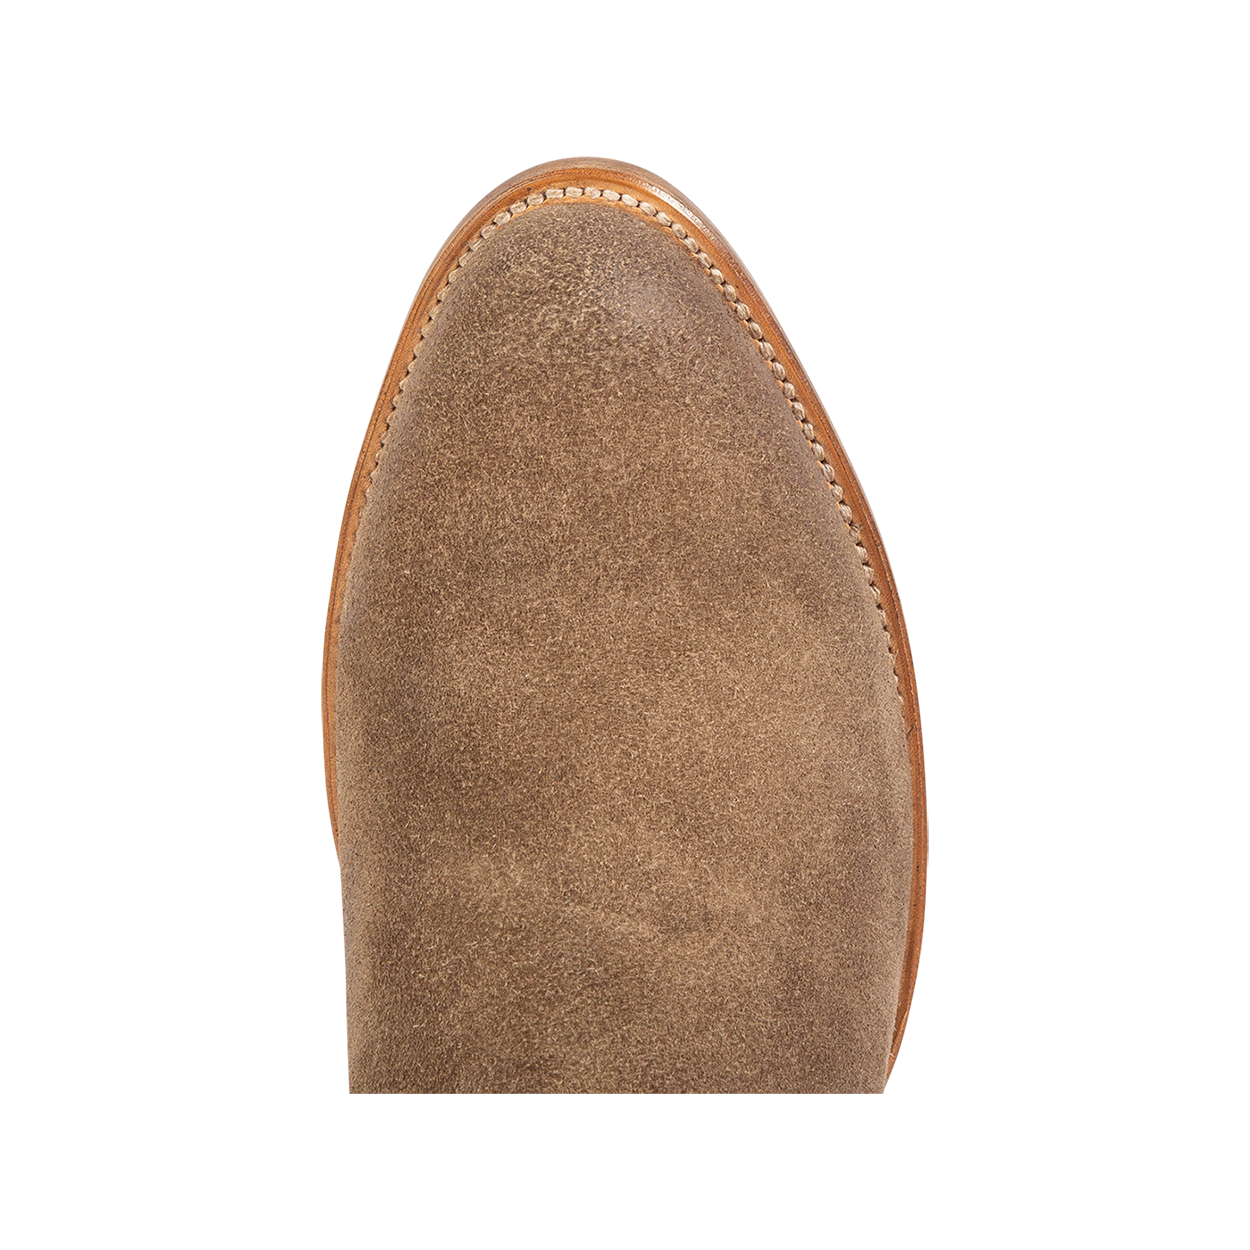 Top view showing traditional toe shape on FREEBIRD men's Henderson taupe suede mid calf boot